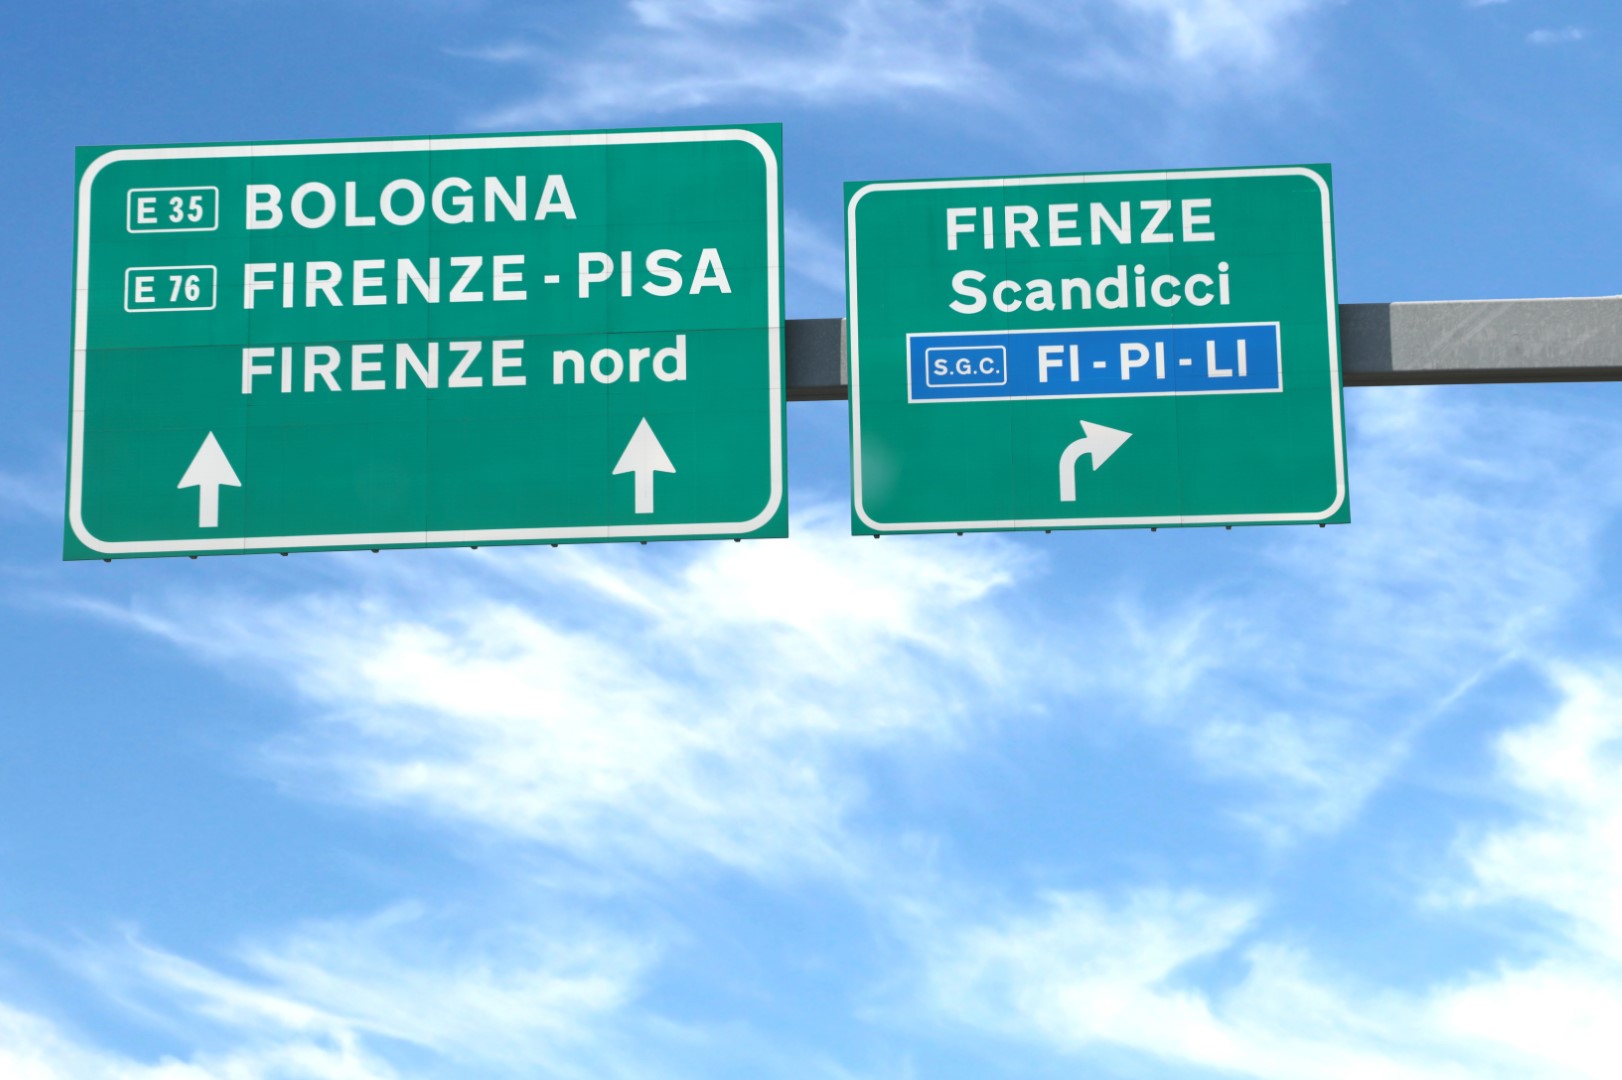 road signs of the Italian highway with the localities of Florence Bologna Pisa and blue sky in the background